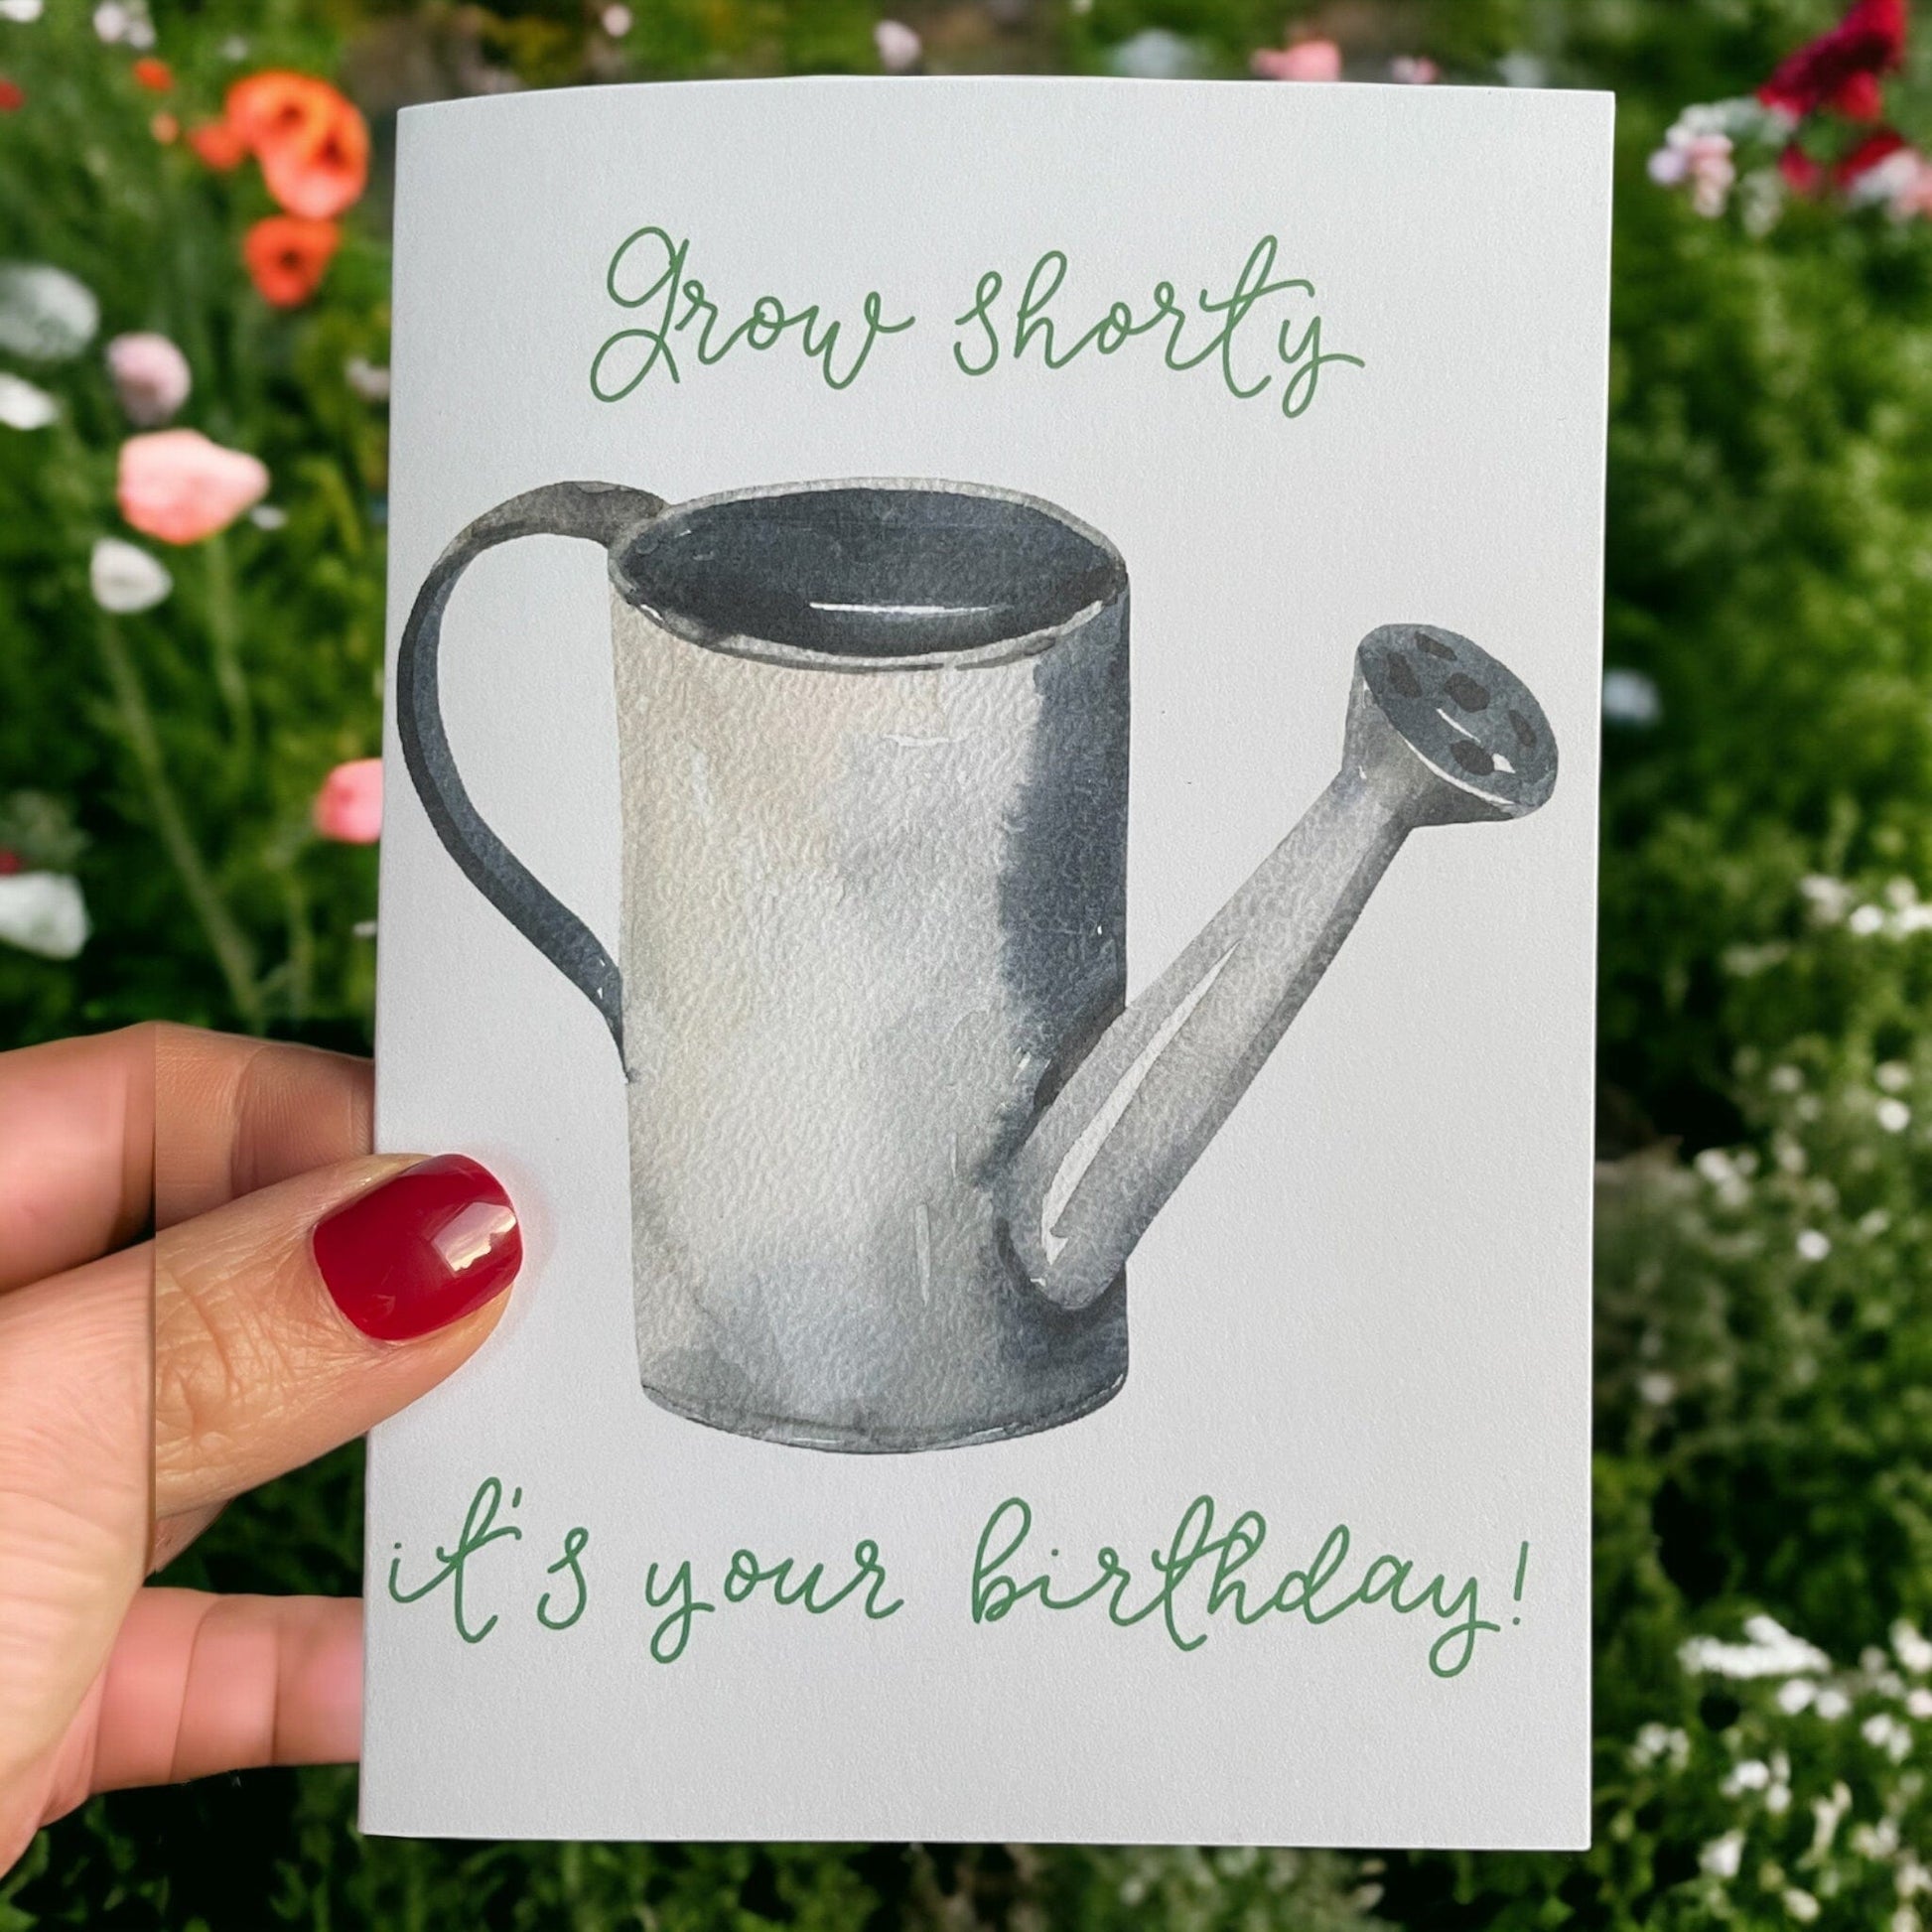 And Hope Designs Grow shorty, it’s your birthday card